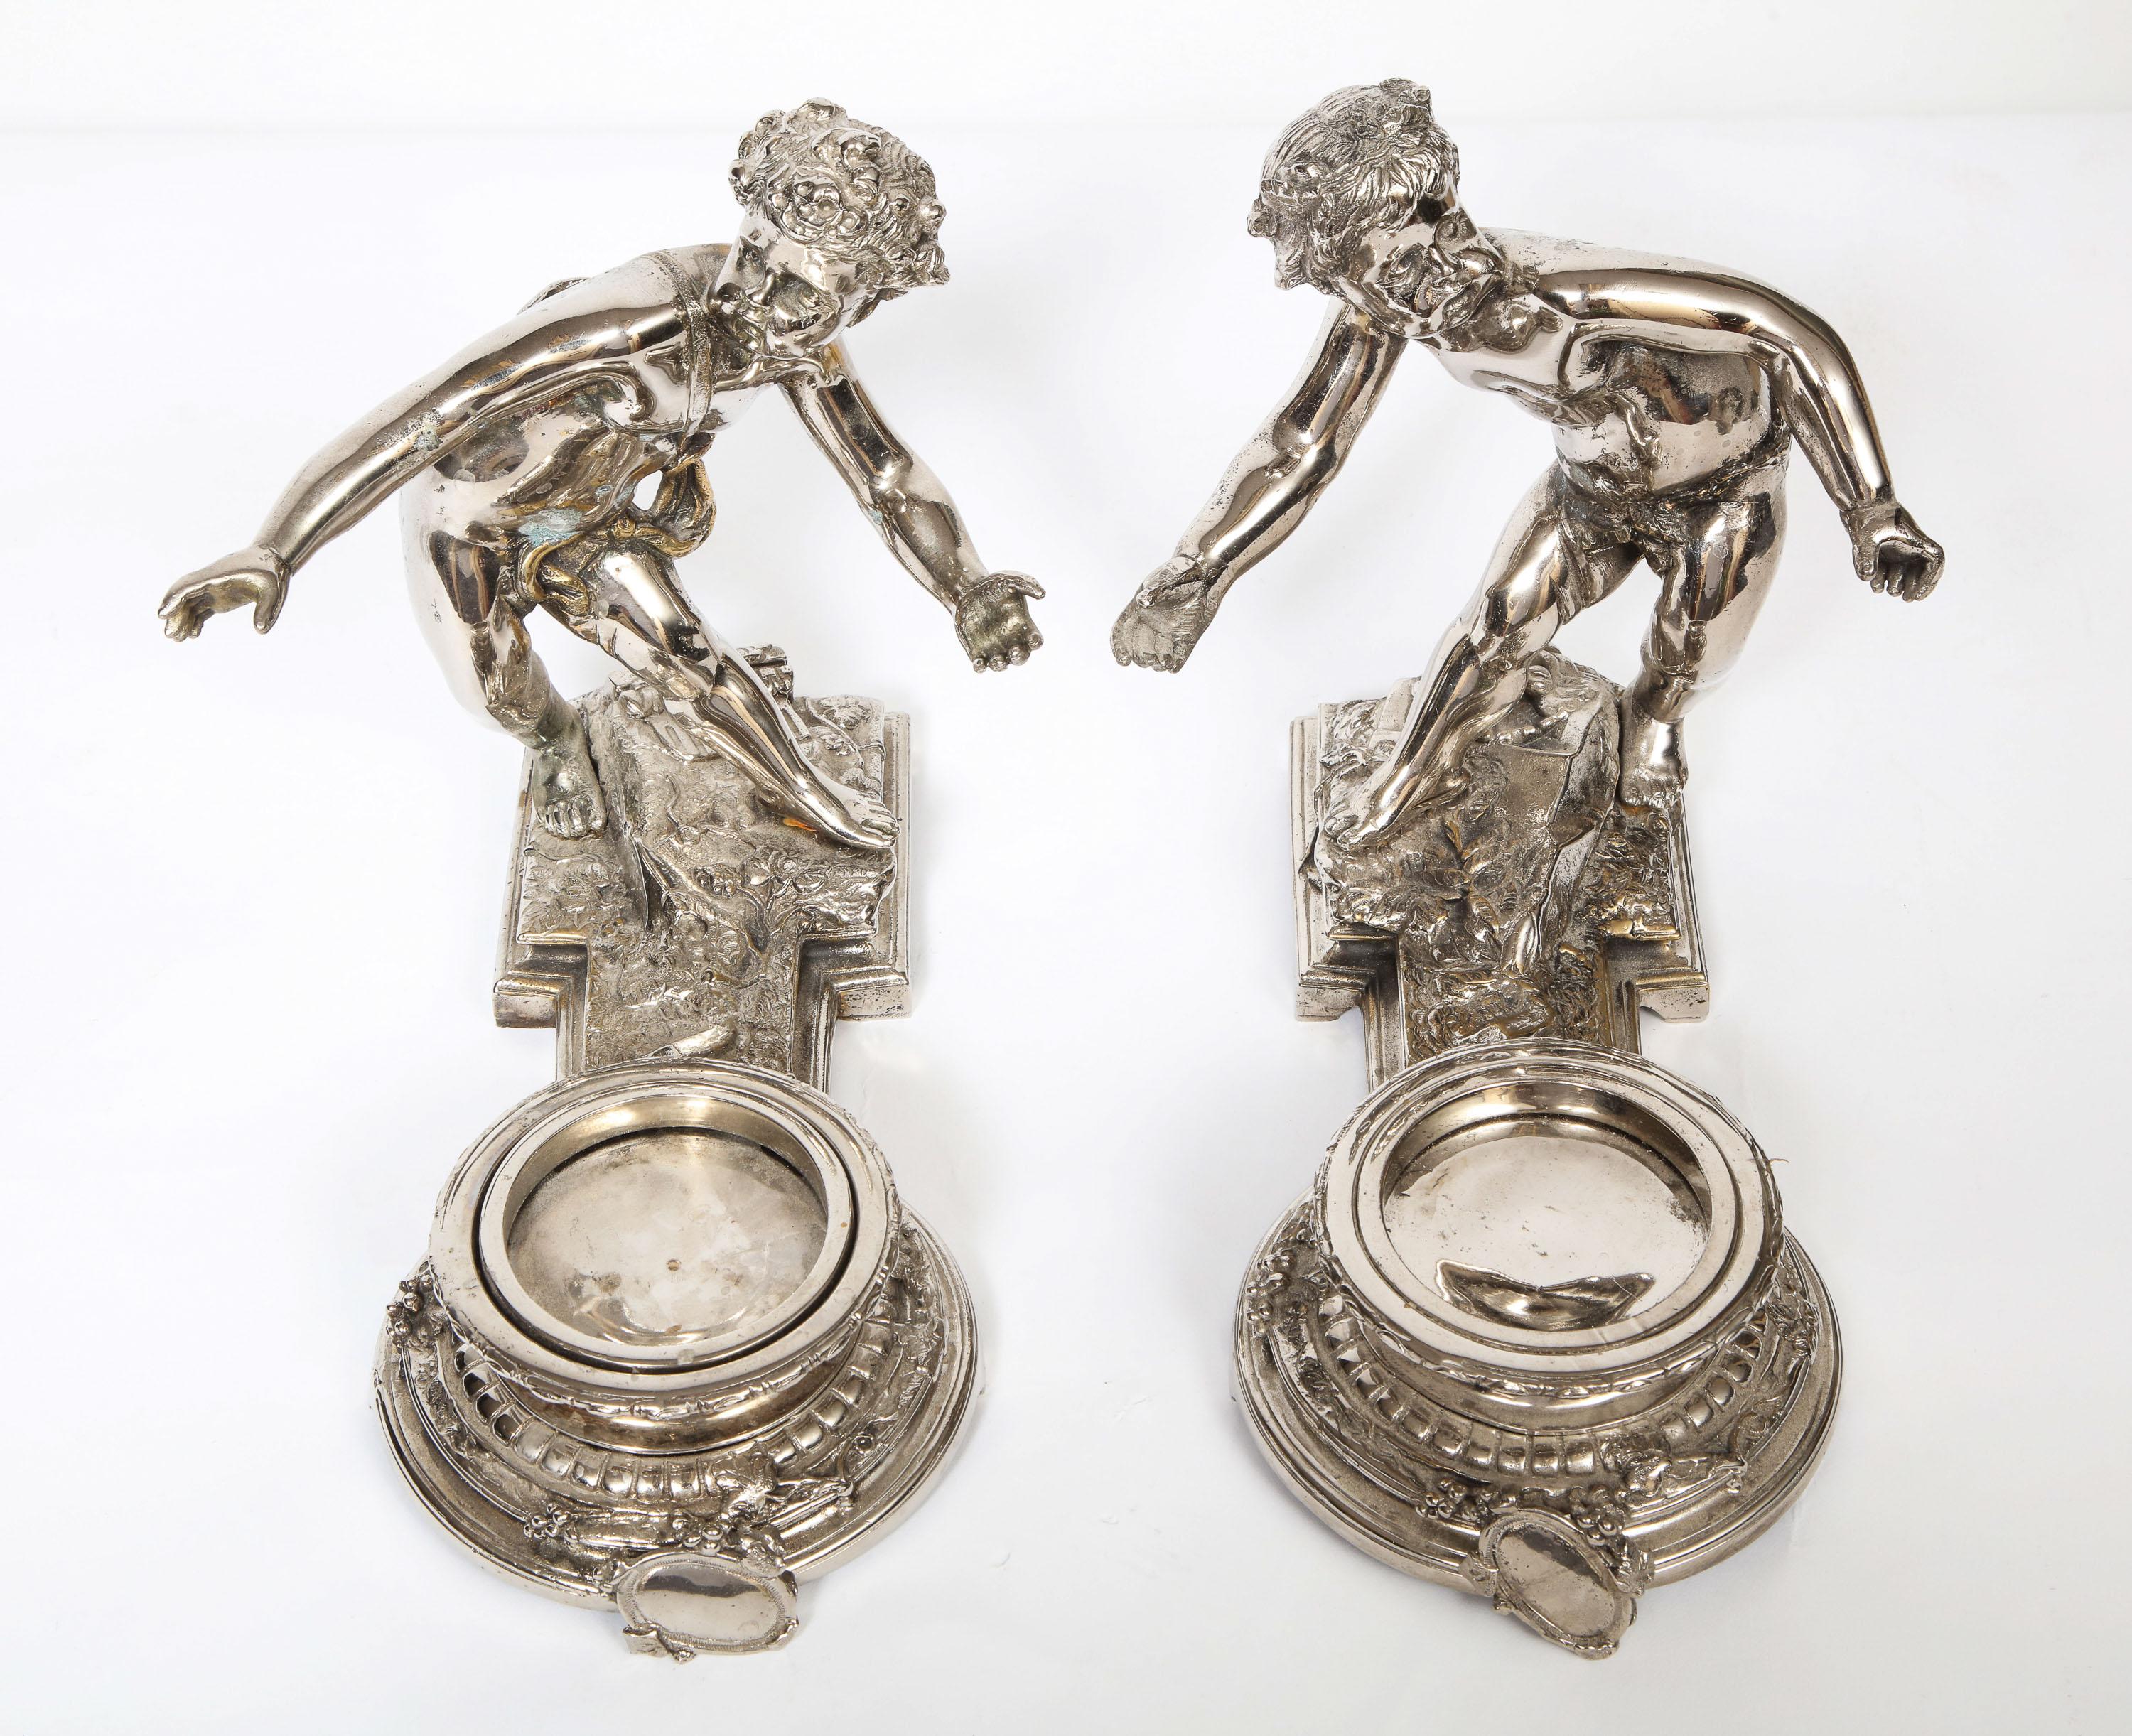 Pair of French Silvered Bronze and Glass Centerpieces with Cherubs 15